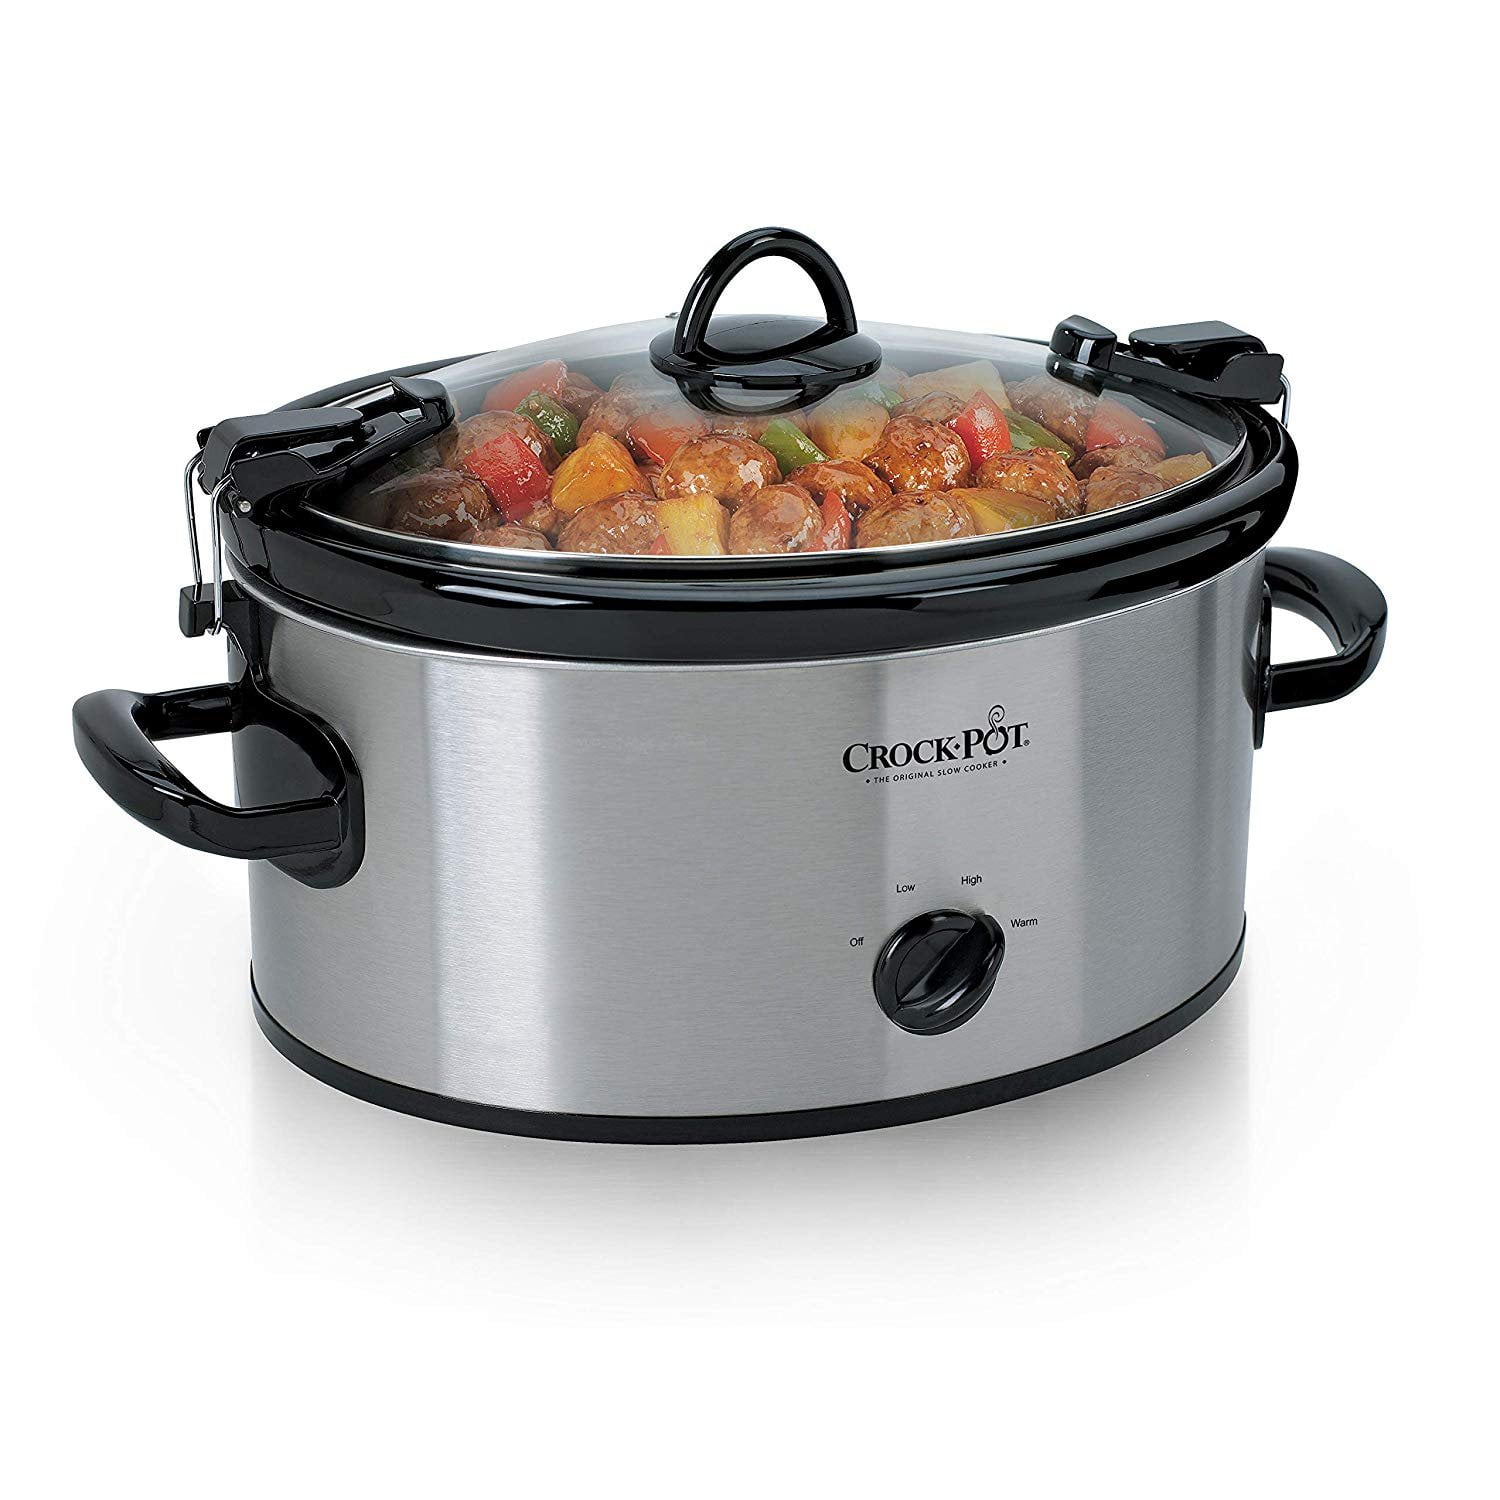 Mainstays 6 Quart Oval Slow Cooker, Stainless Steel Finish, Glass Lid,  Model # MS54100112168S